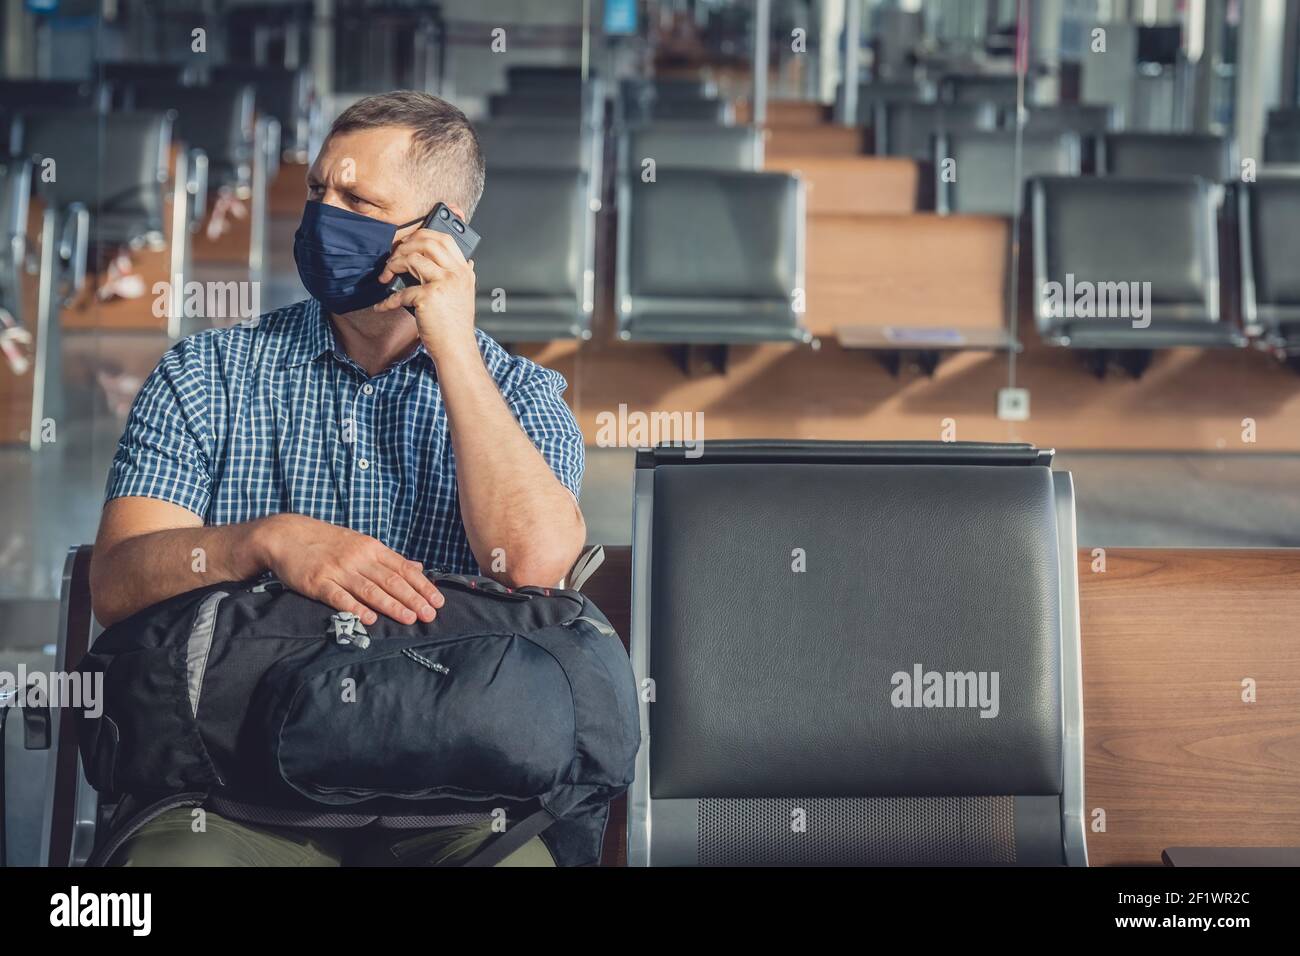 Man with a mask talking on mobile phone in airport lounge Stock Photo